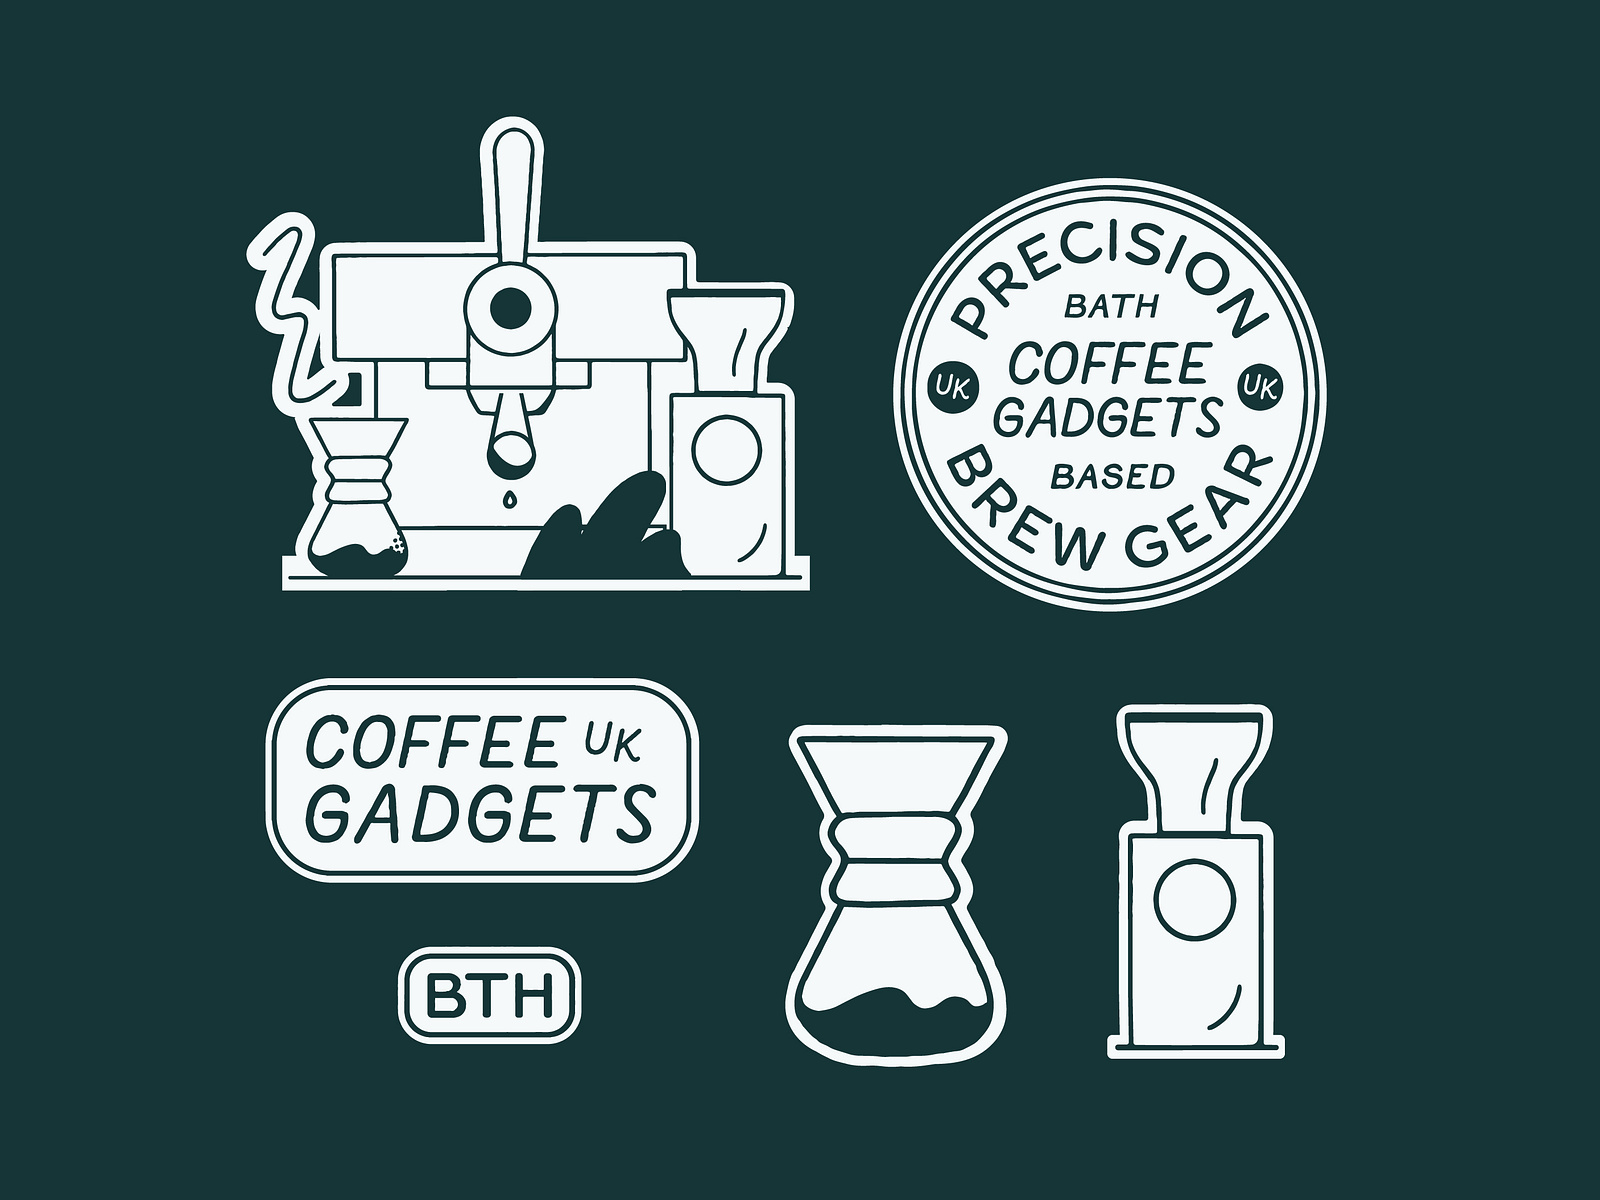 Coffee Gadgets UK by Emily Melling on Dribbble